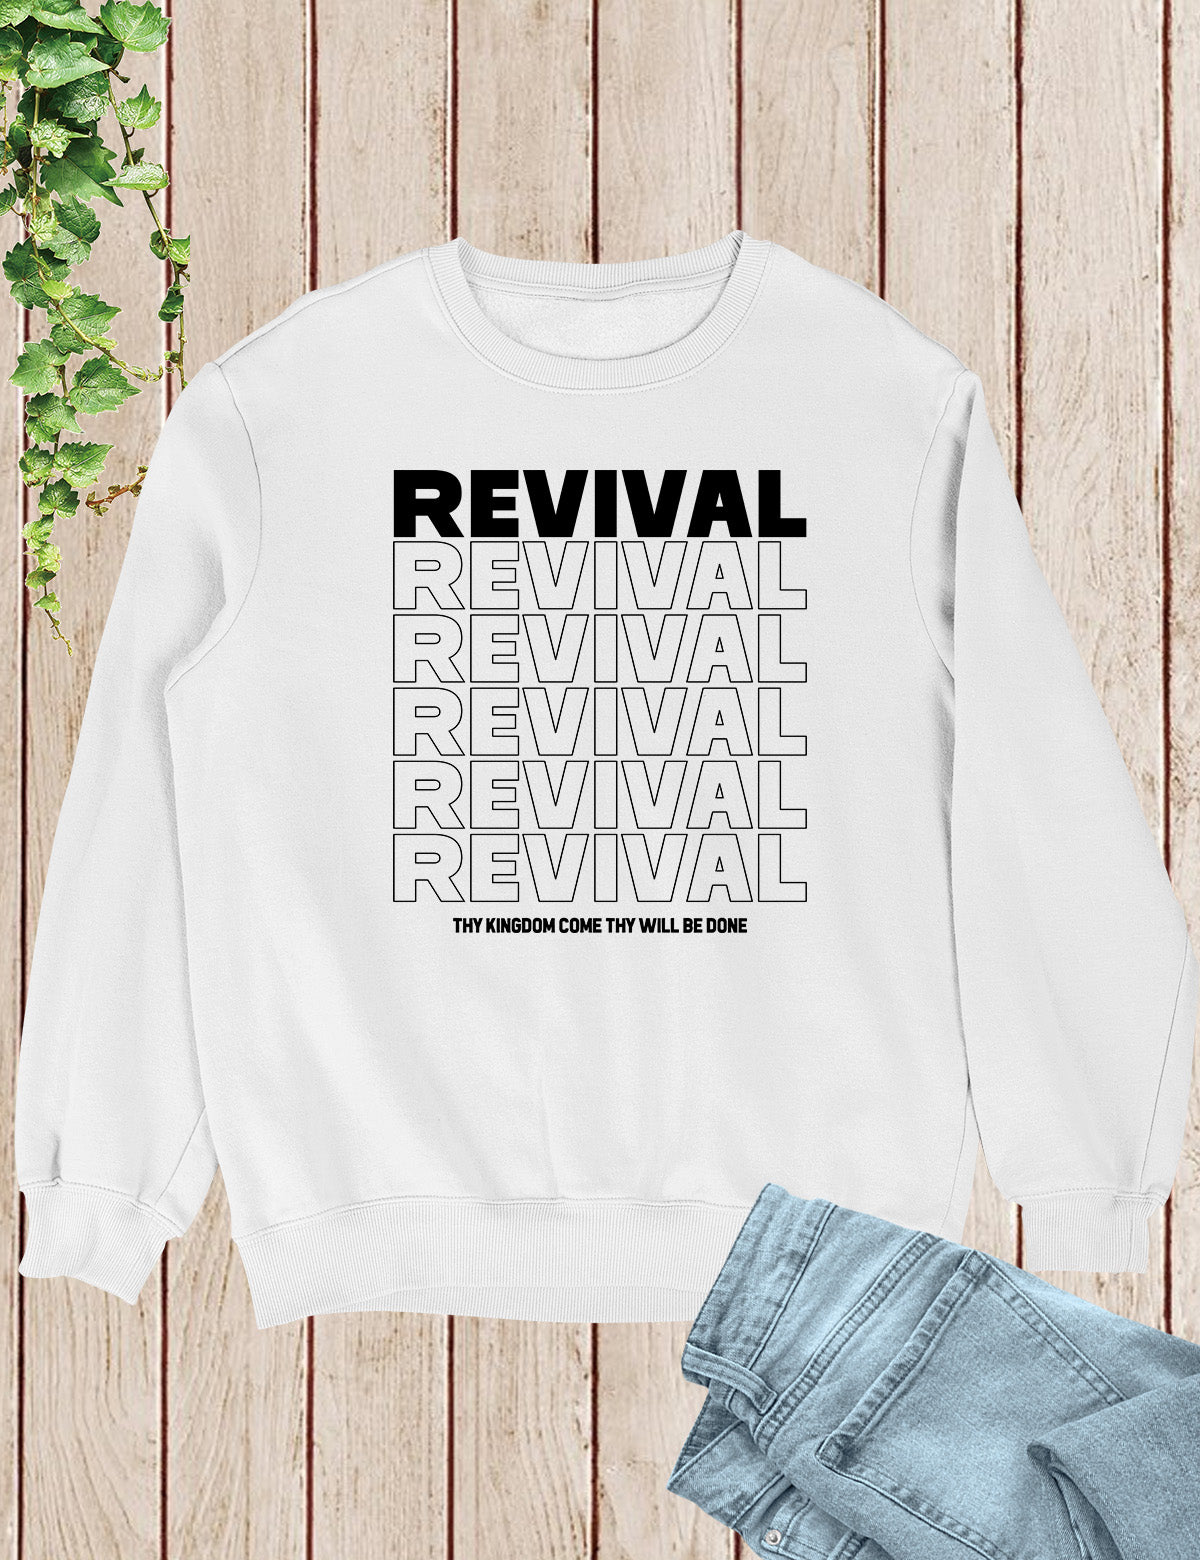 Christian Revival Jumpert Thy Kingdom Come Thy Will Be Done Sweatshirt